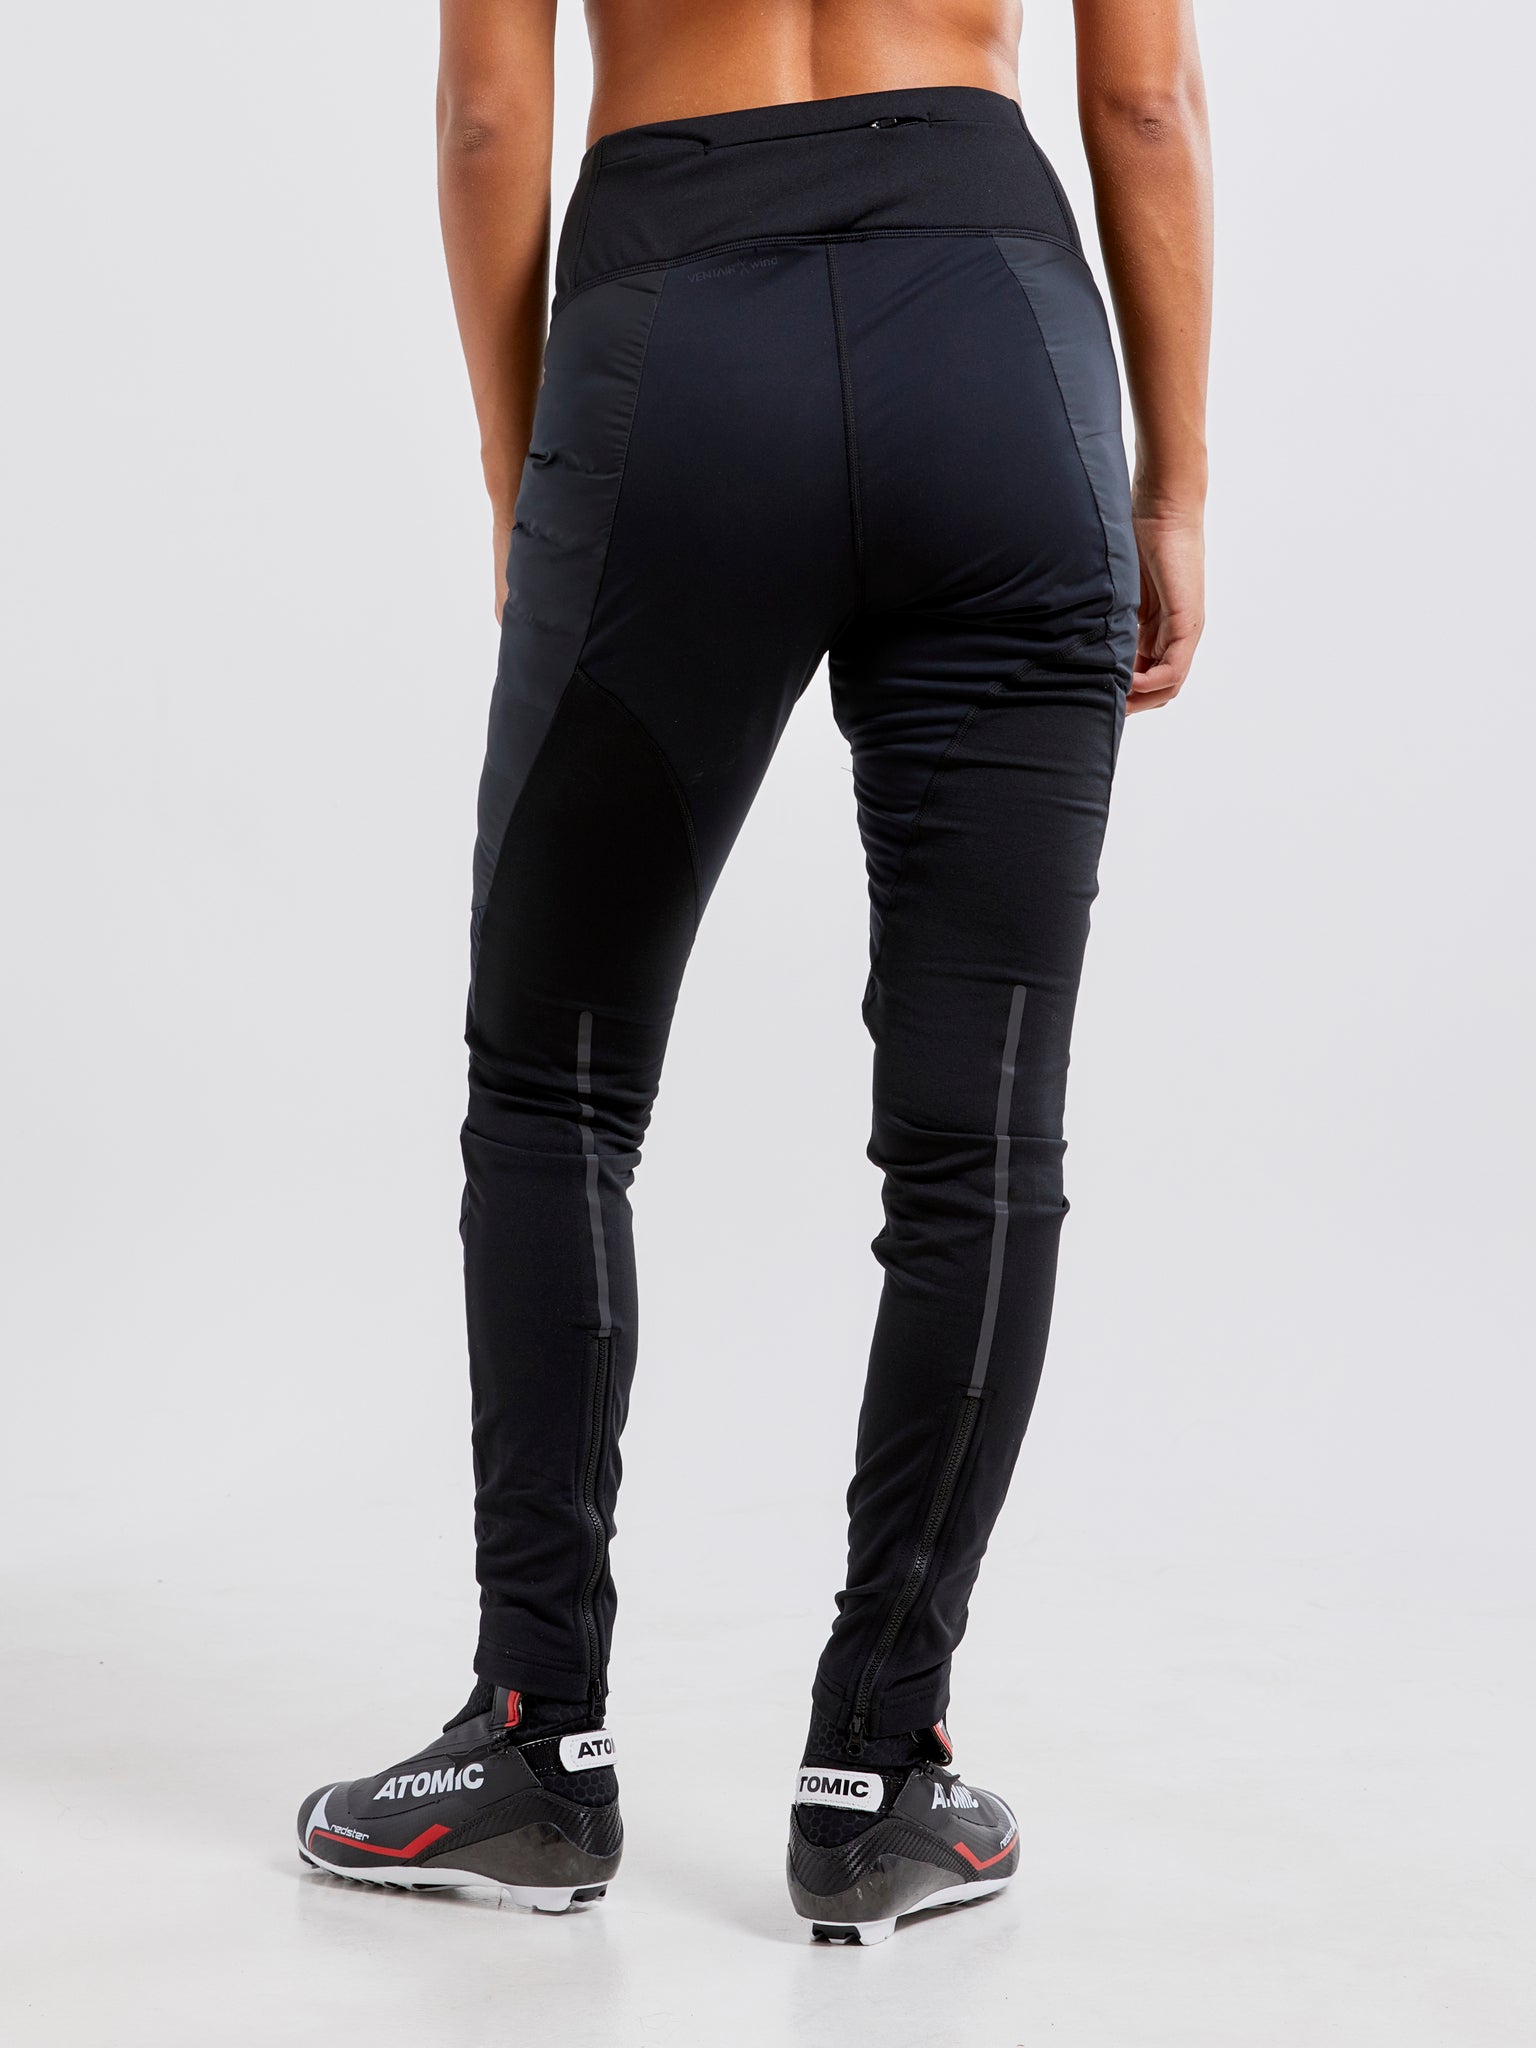 ADV PURSUIT THERMAL TIGHTS W - VO2 Sports Co